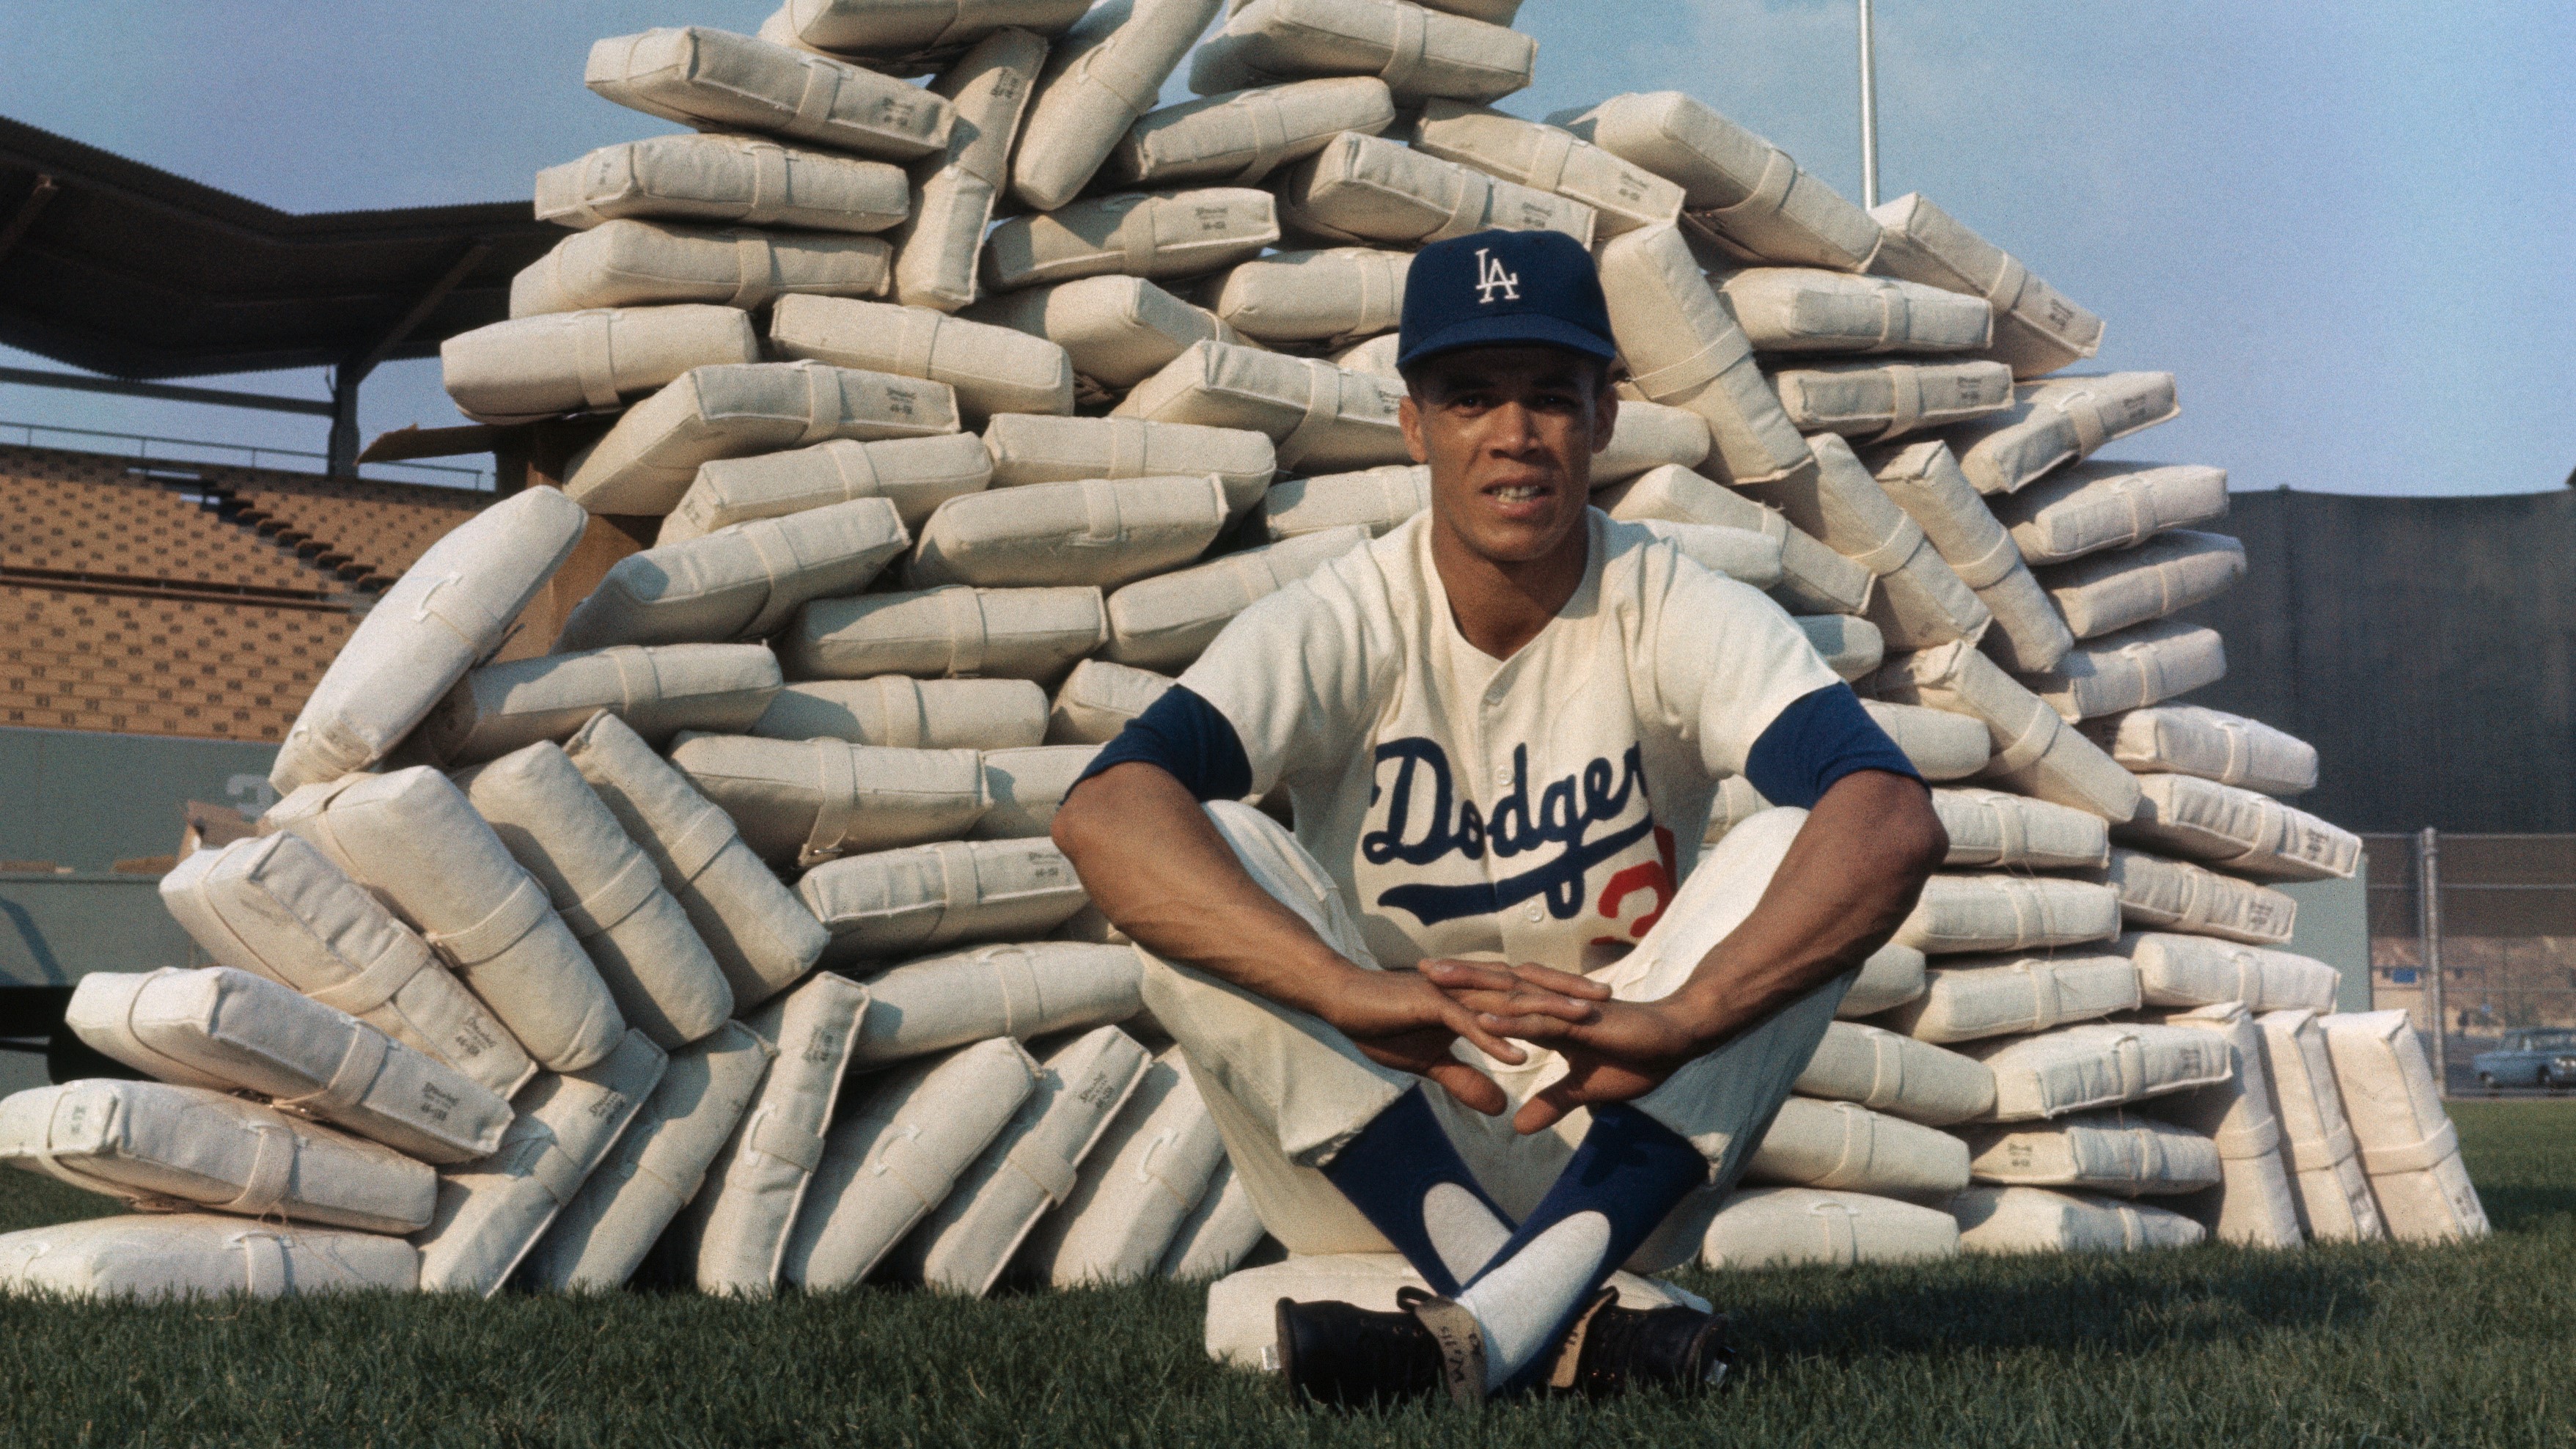 Former Expo, legendary base-stealing shortstop Maury Wills dies at 89